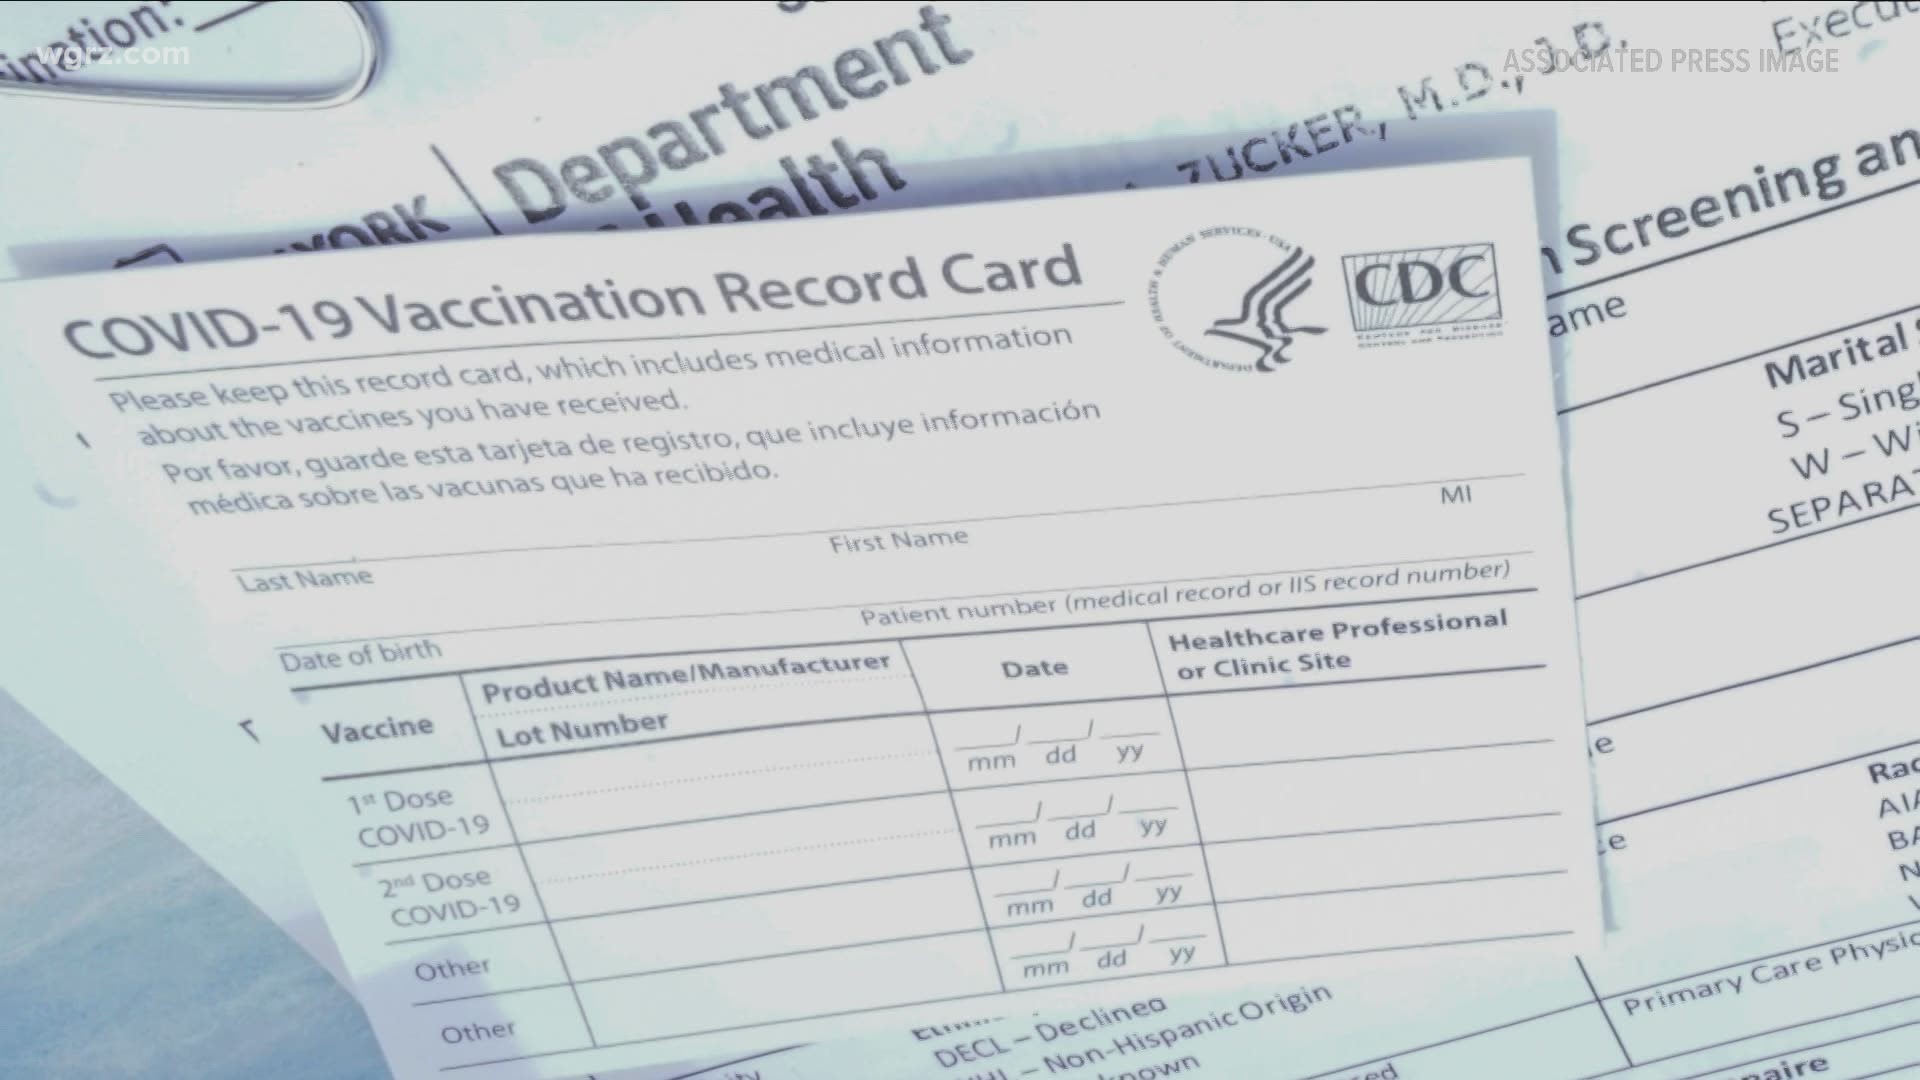 We verify questions you have of the Vaccine cards.